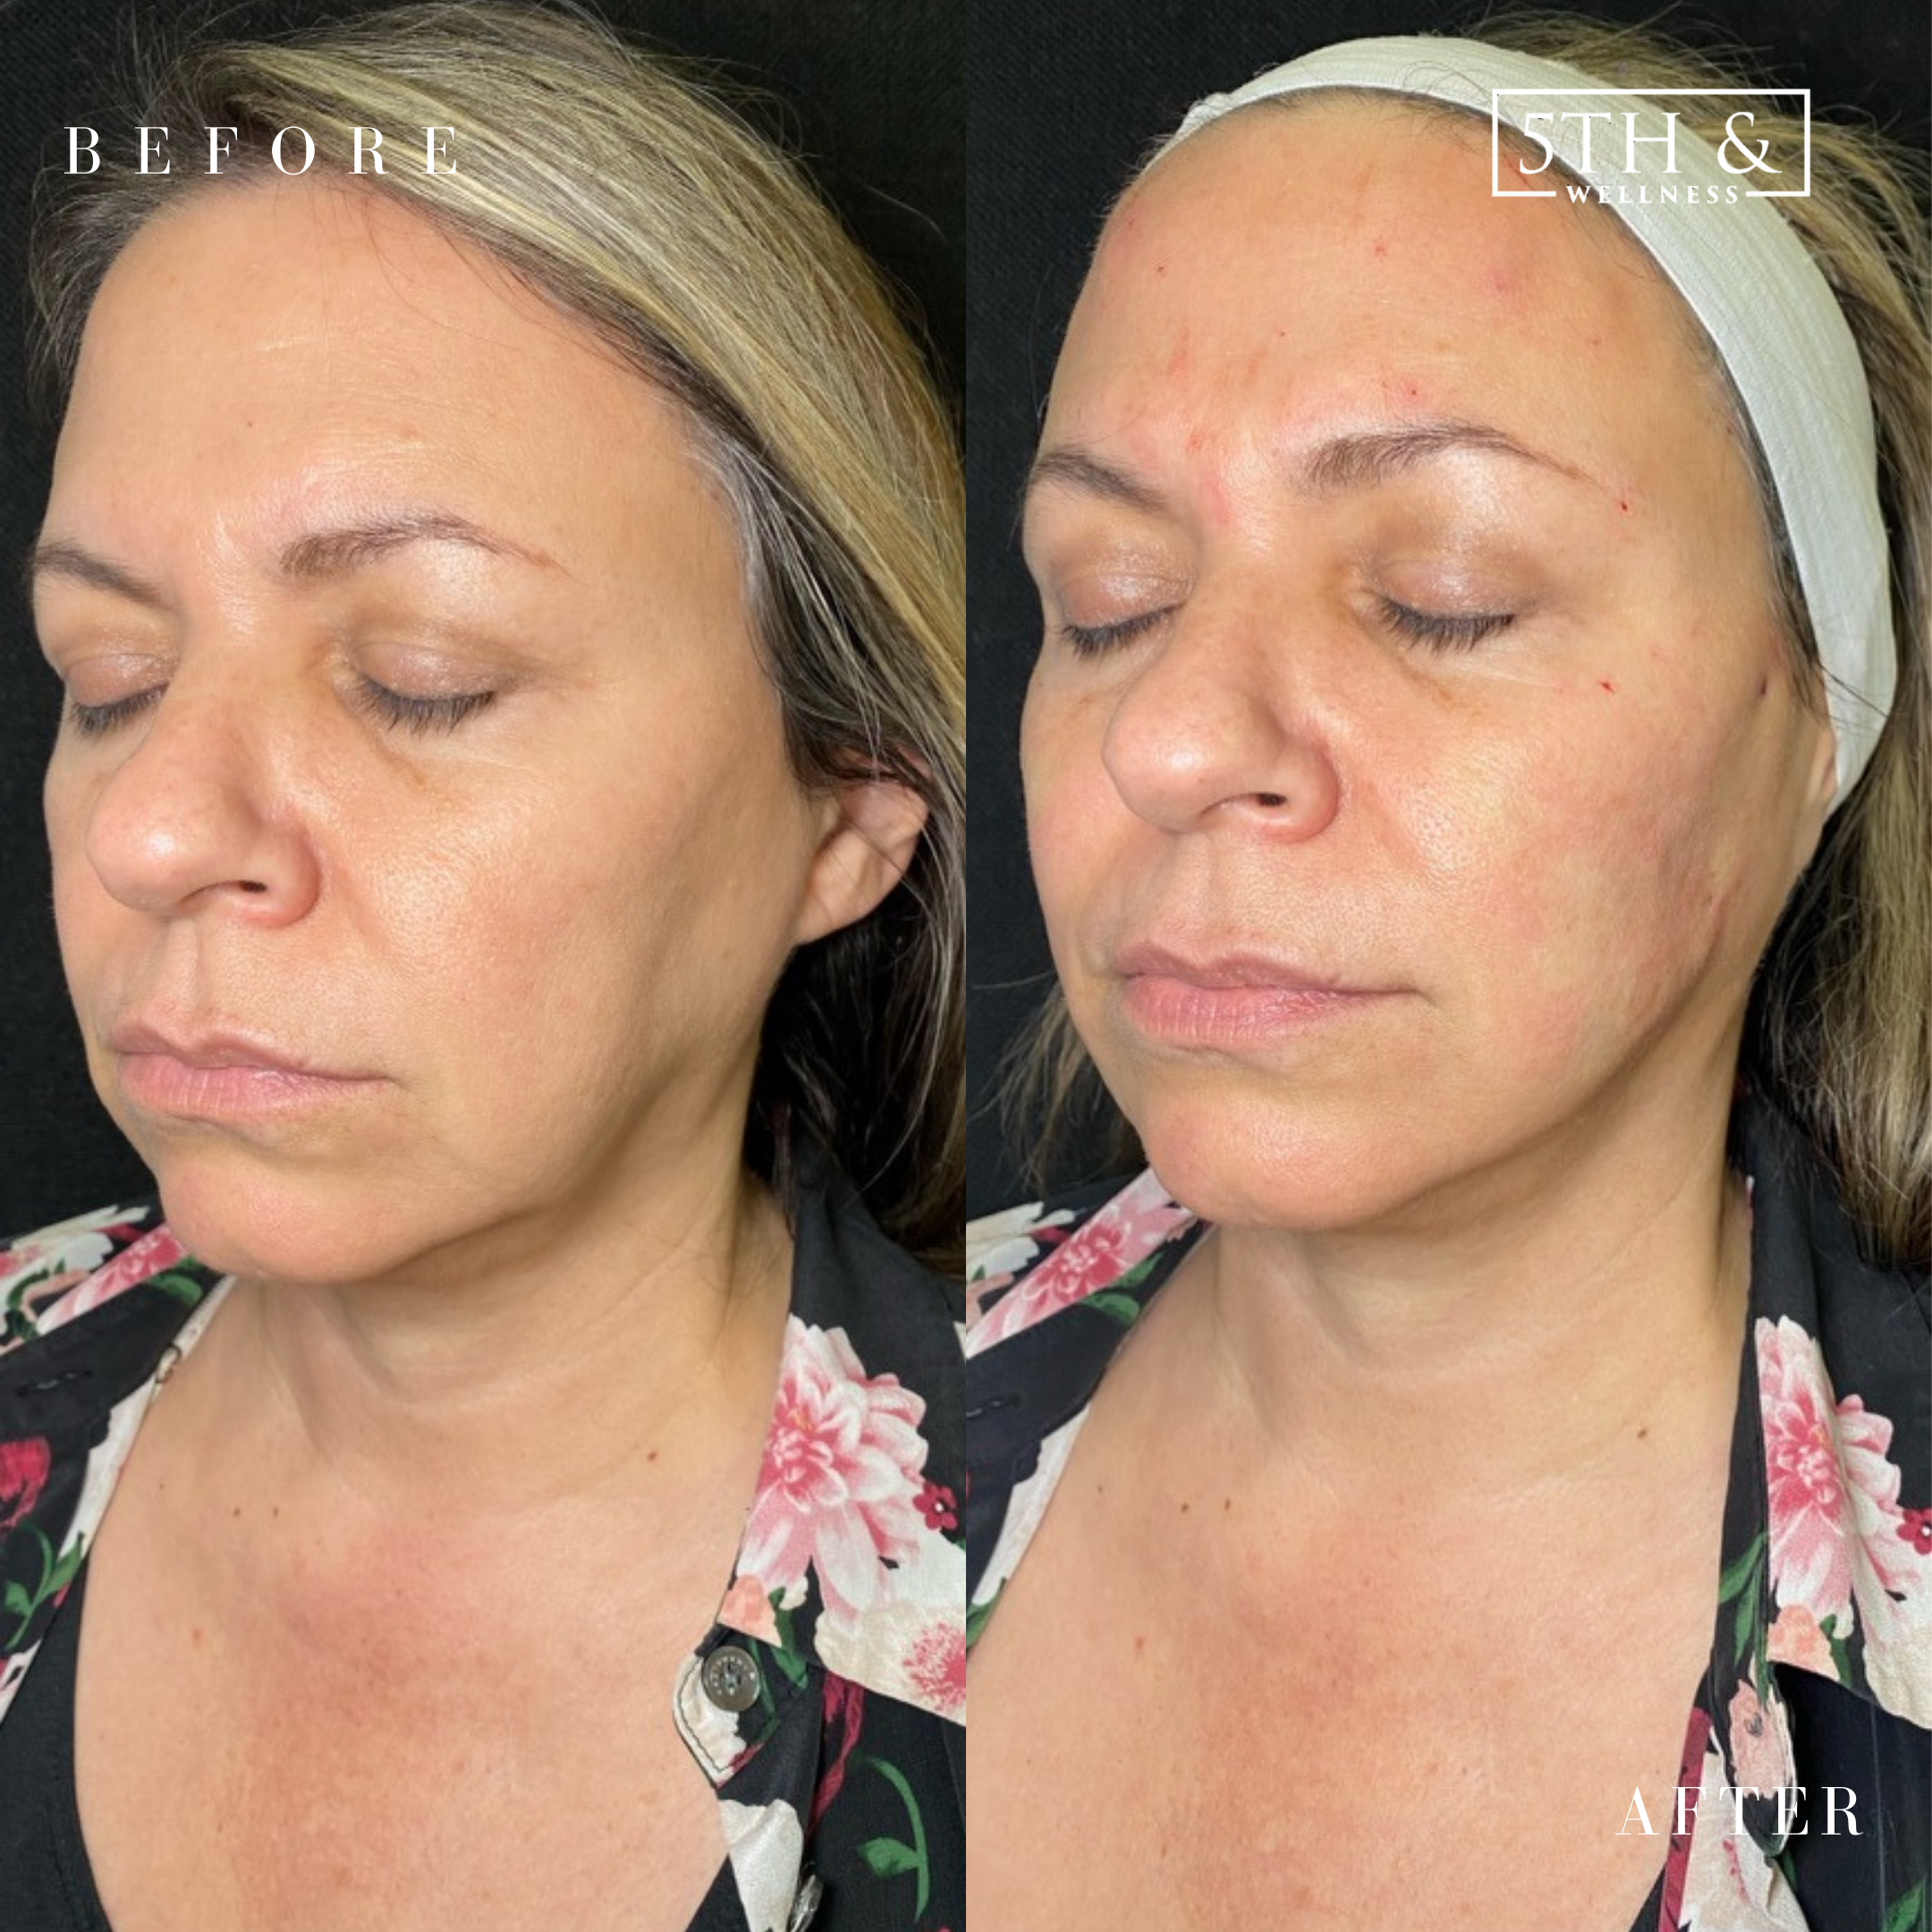 before and after results from 5th and Wellness treatment